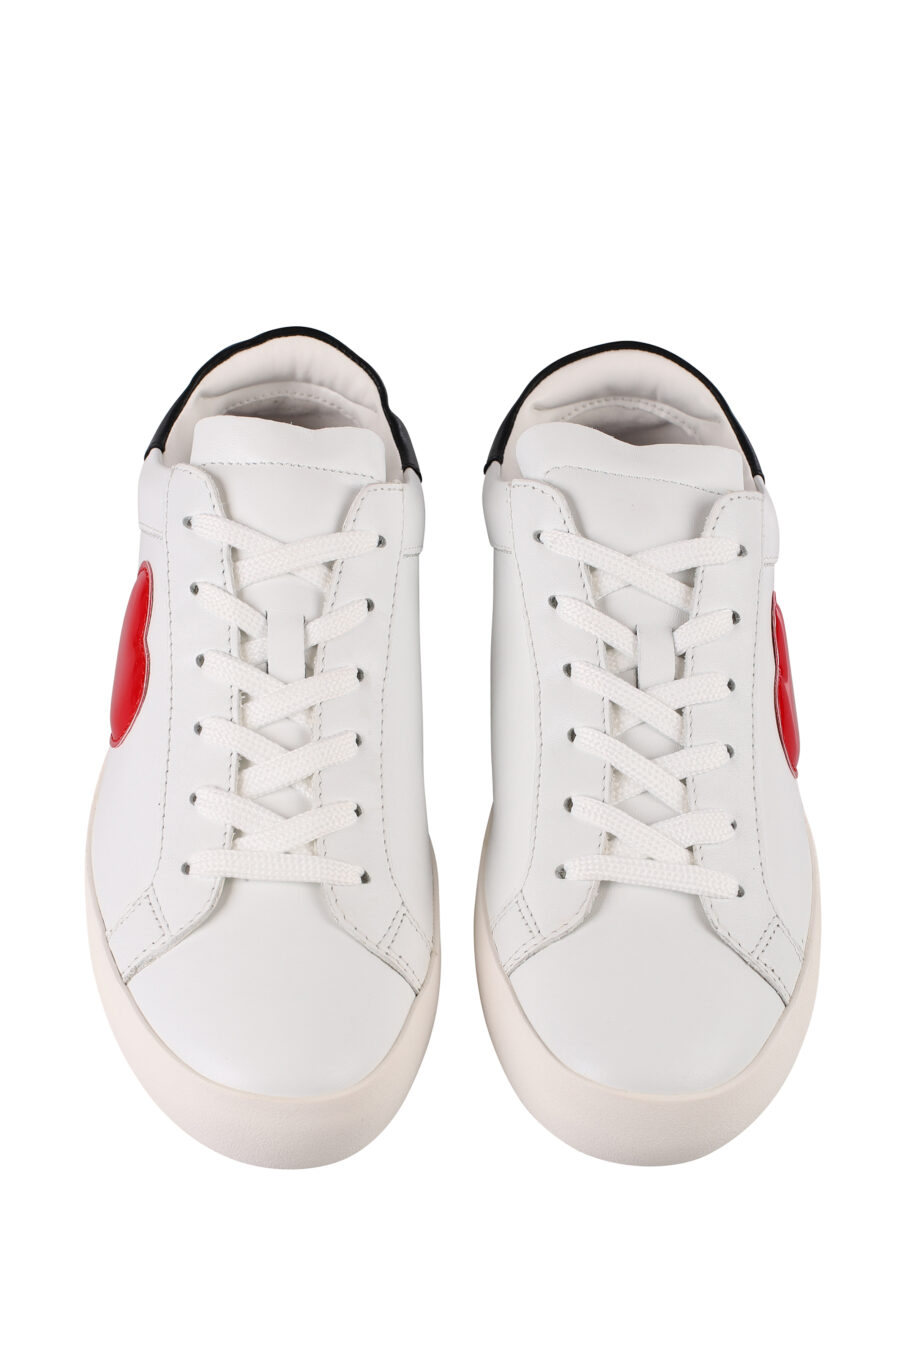 White trainers with red heart on the side and logo on the sole - IMG 1231